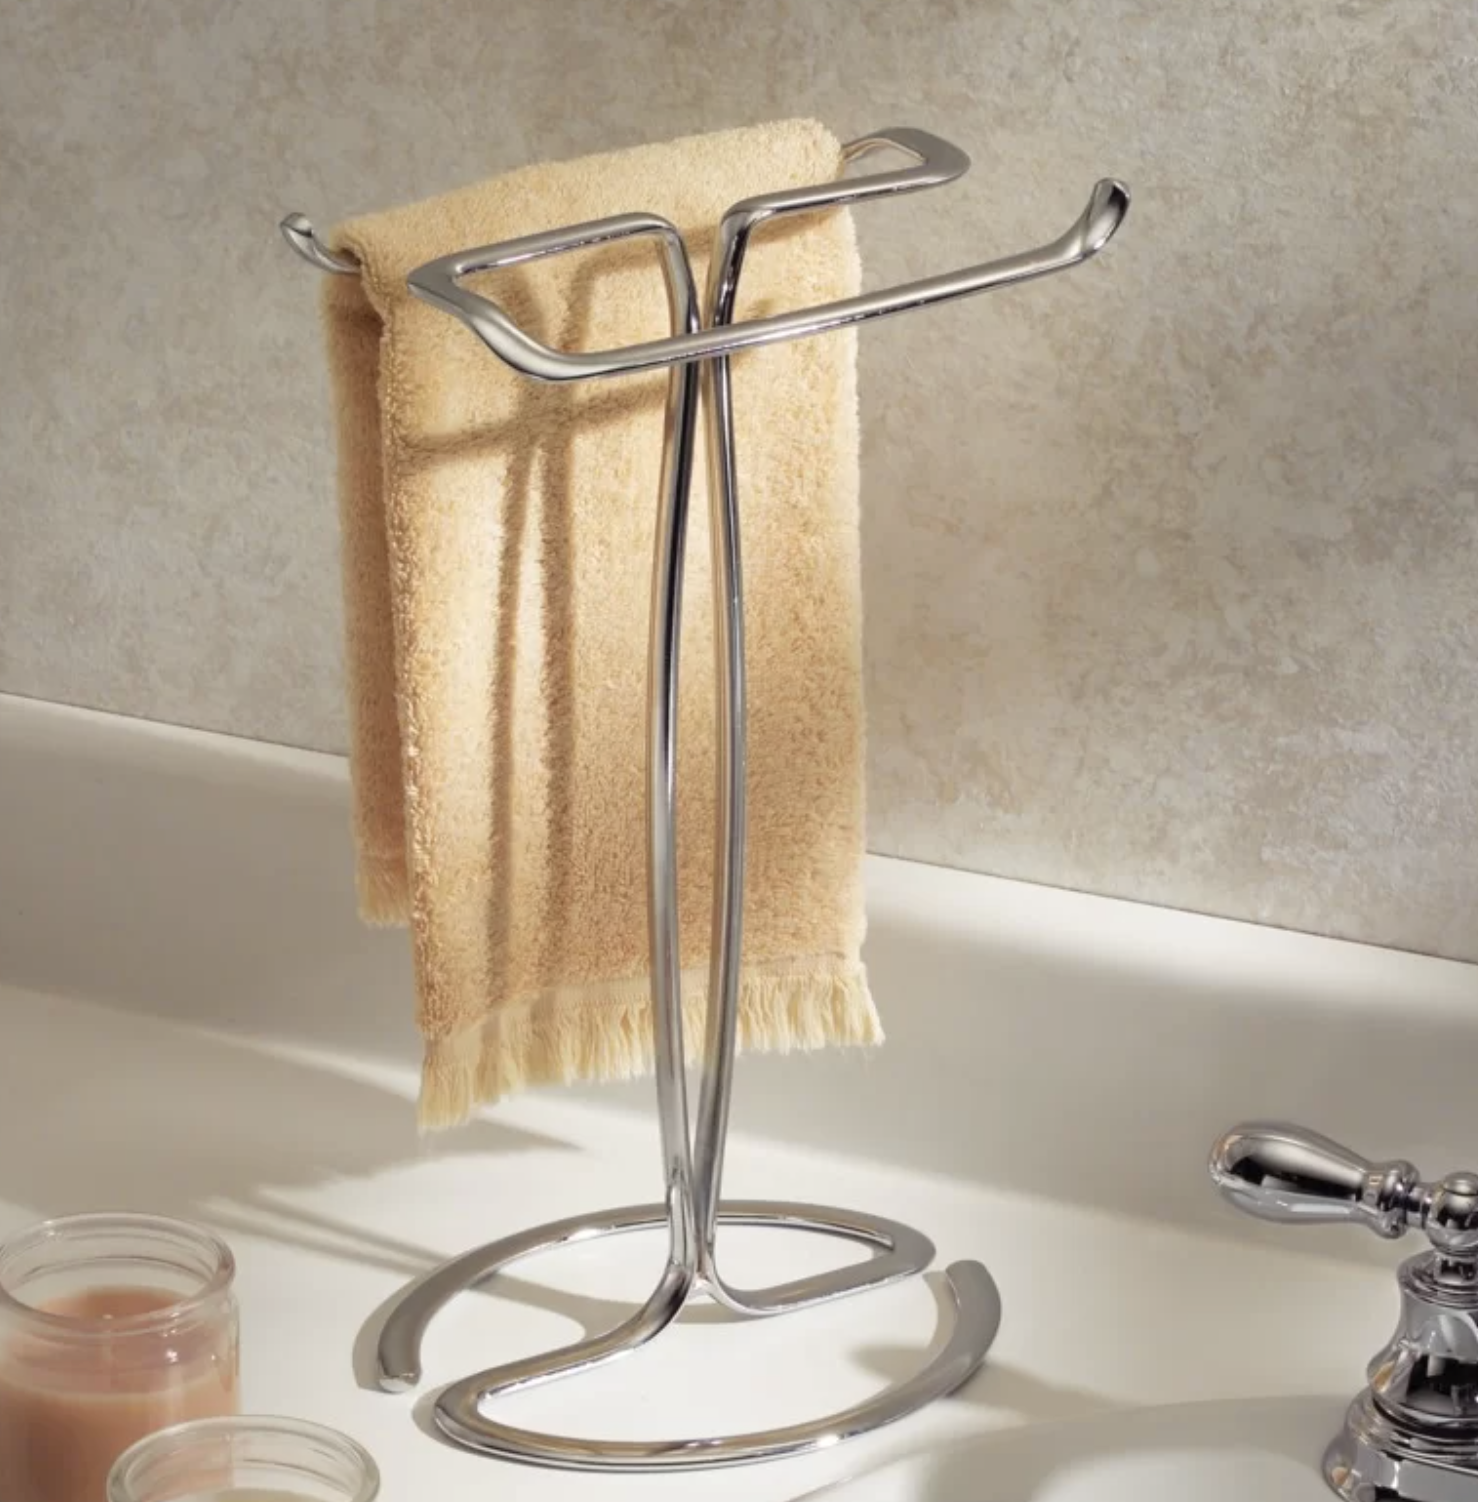 the towel rack holding a hand towel